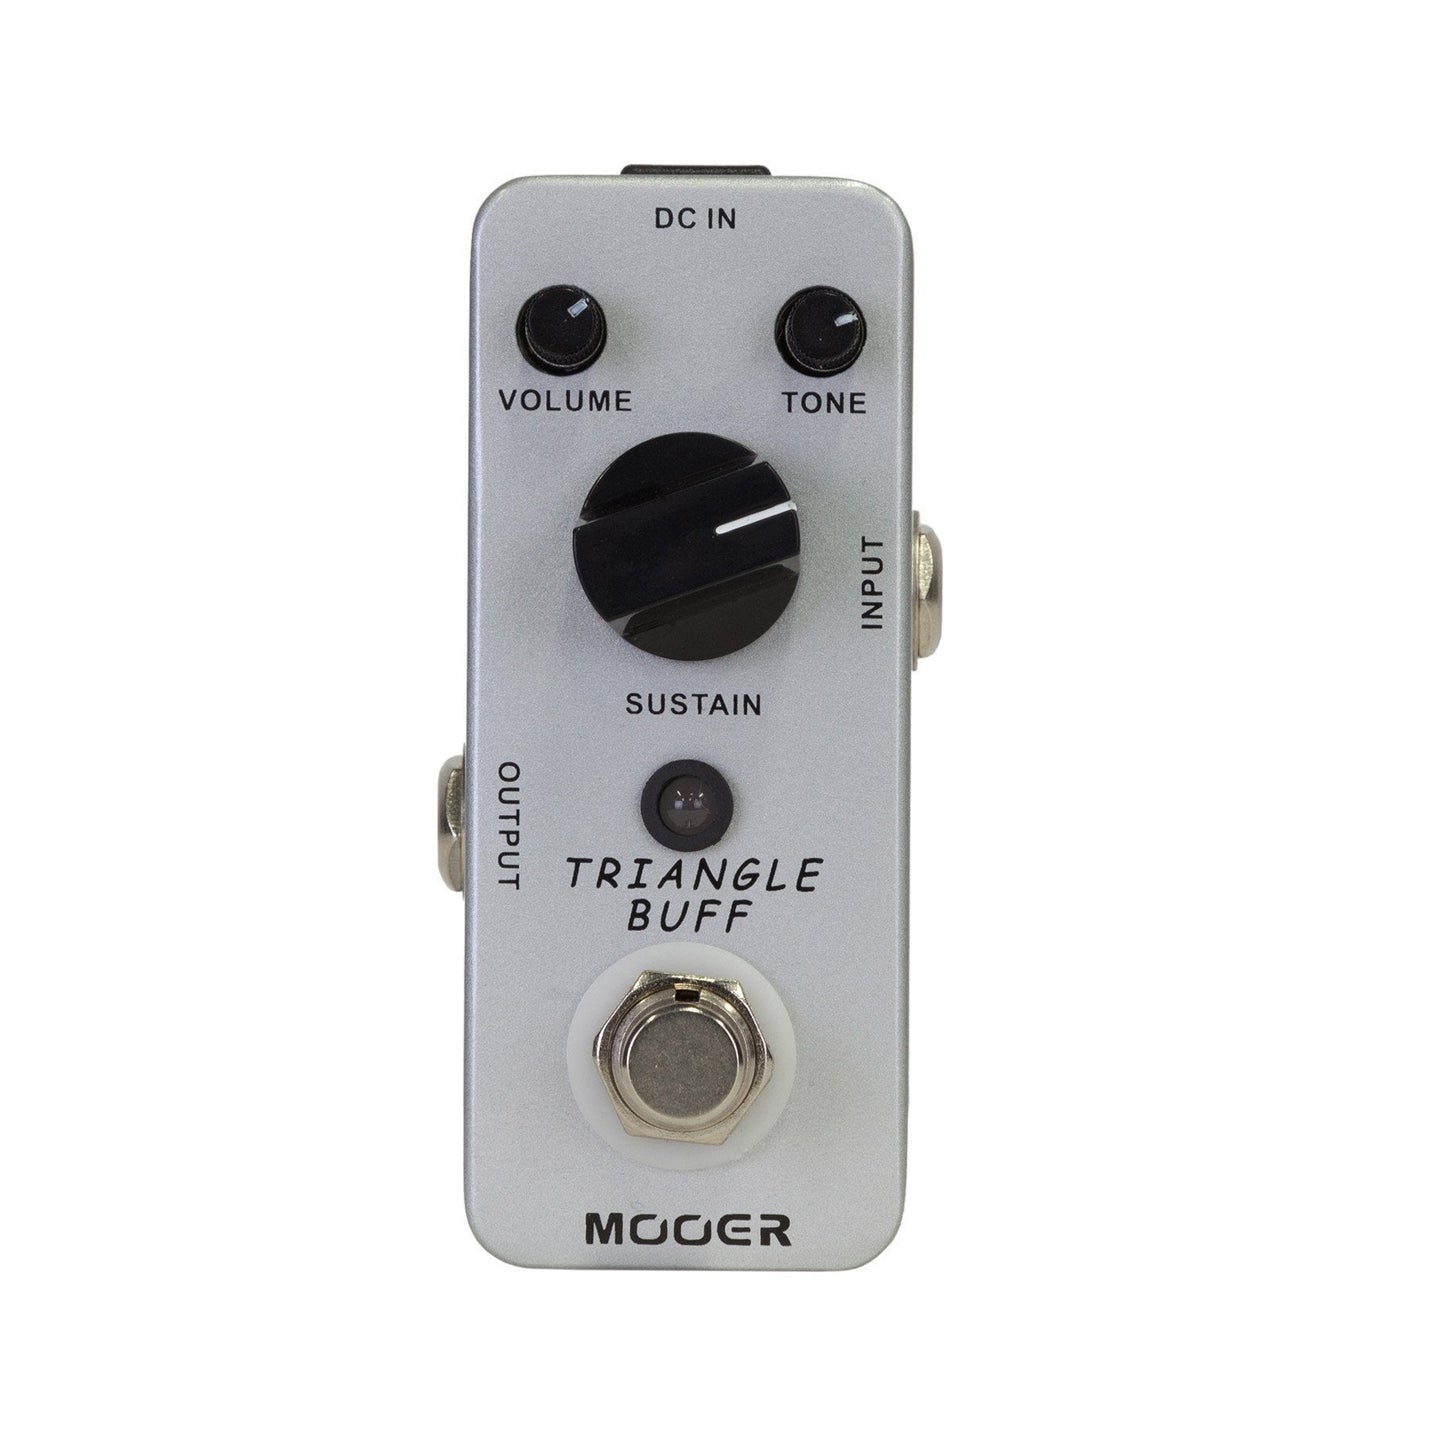 Mooer Triangle Buff Vintage Fuzz Micro Guitar Effects Pedal